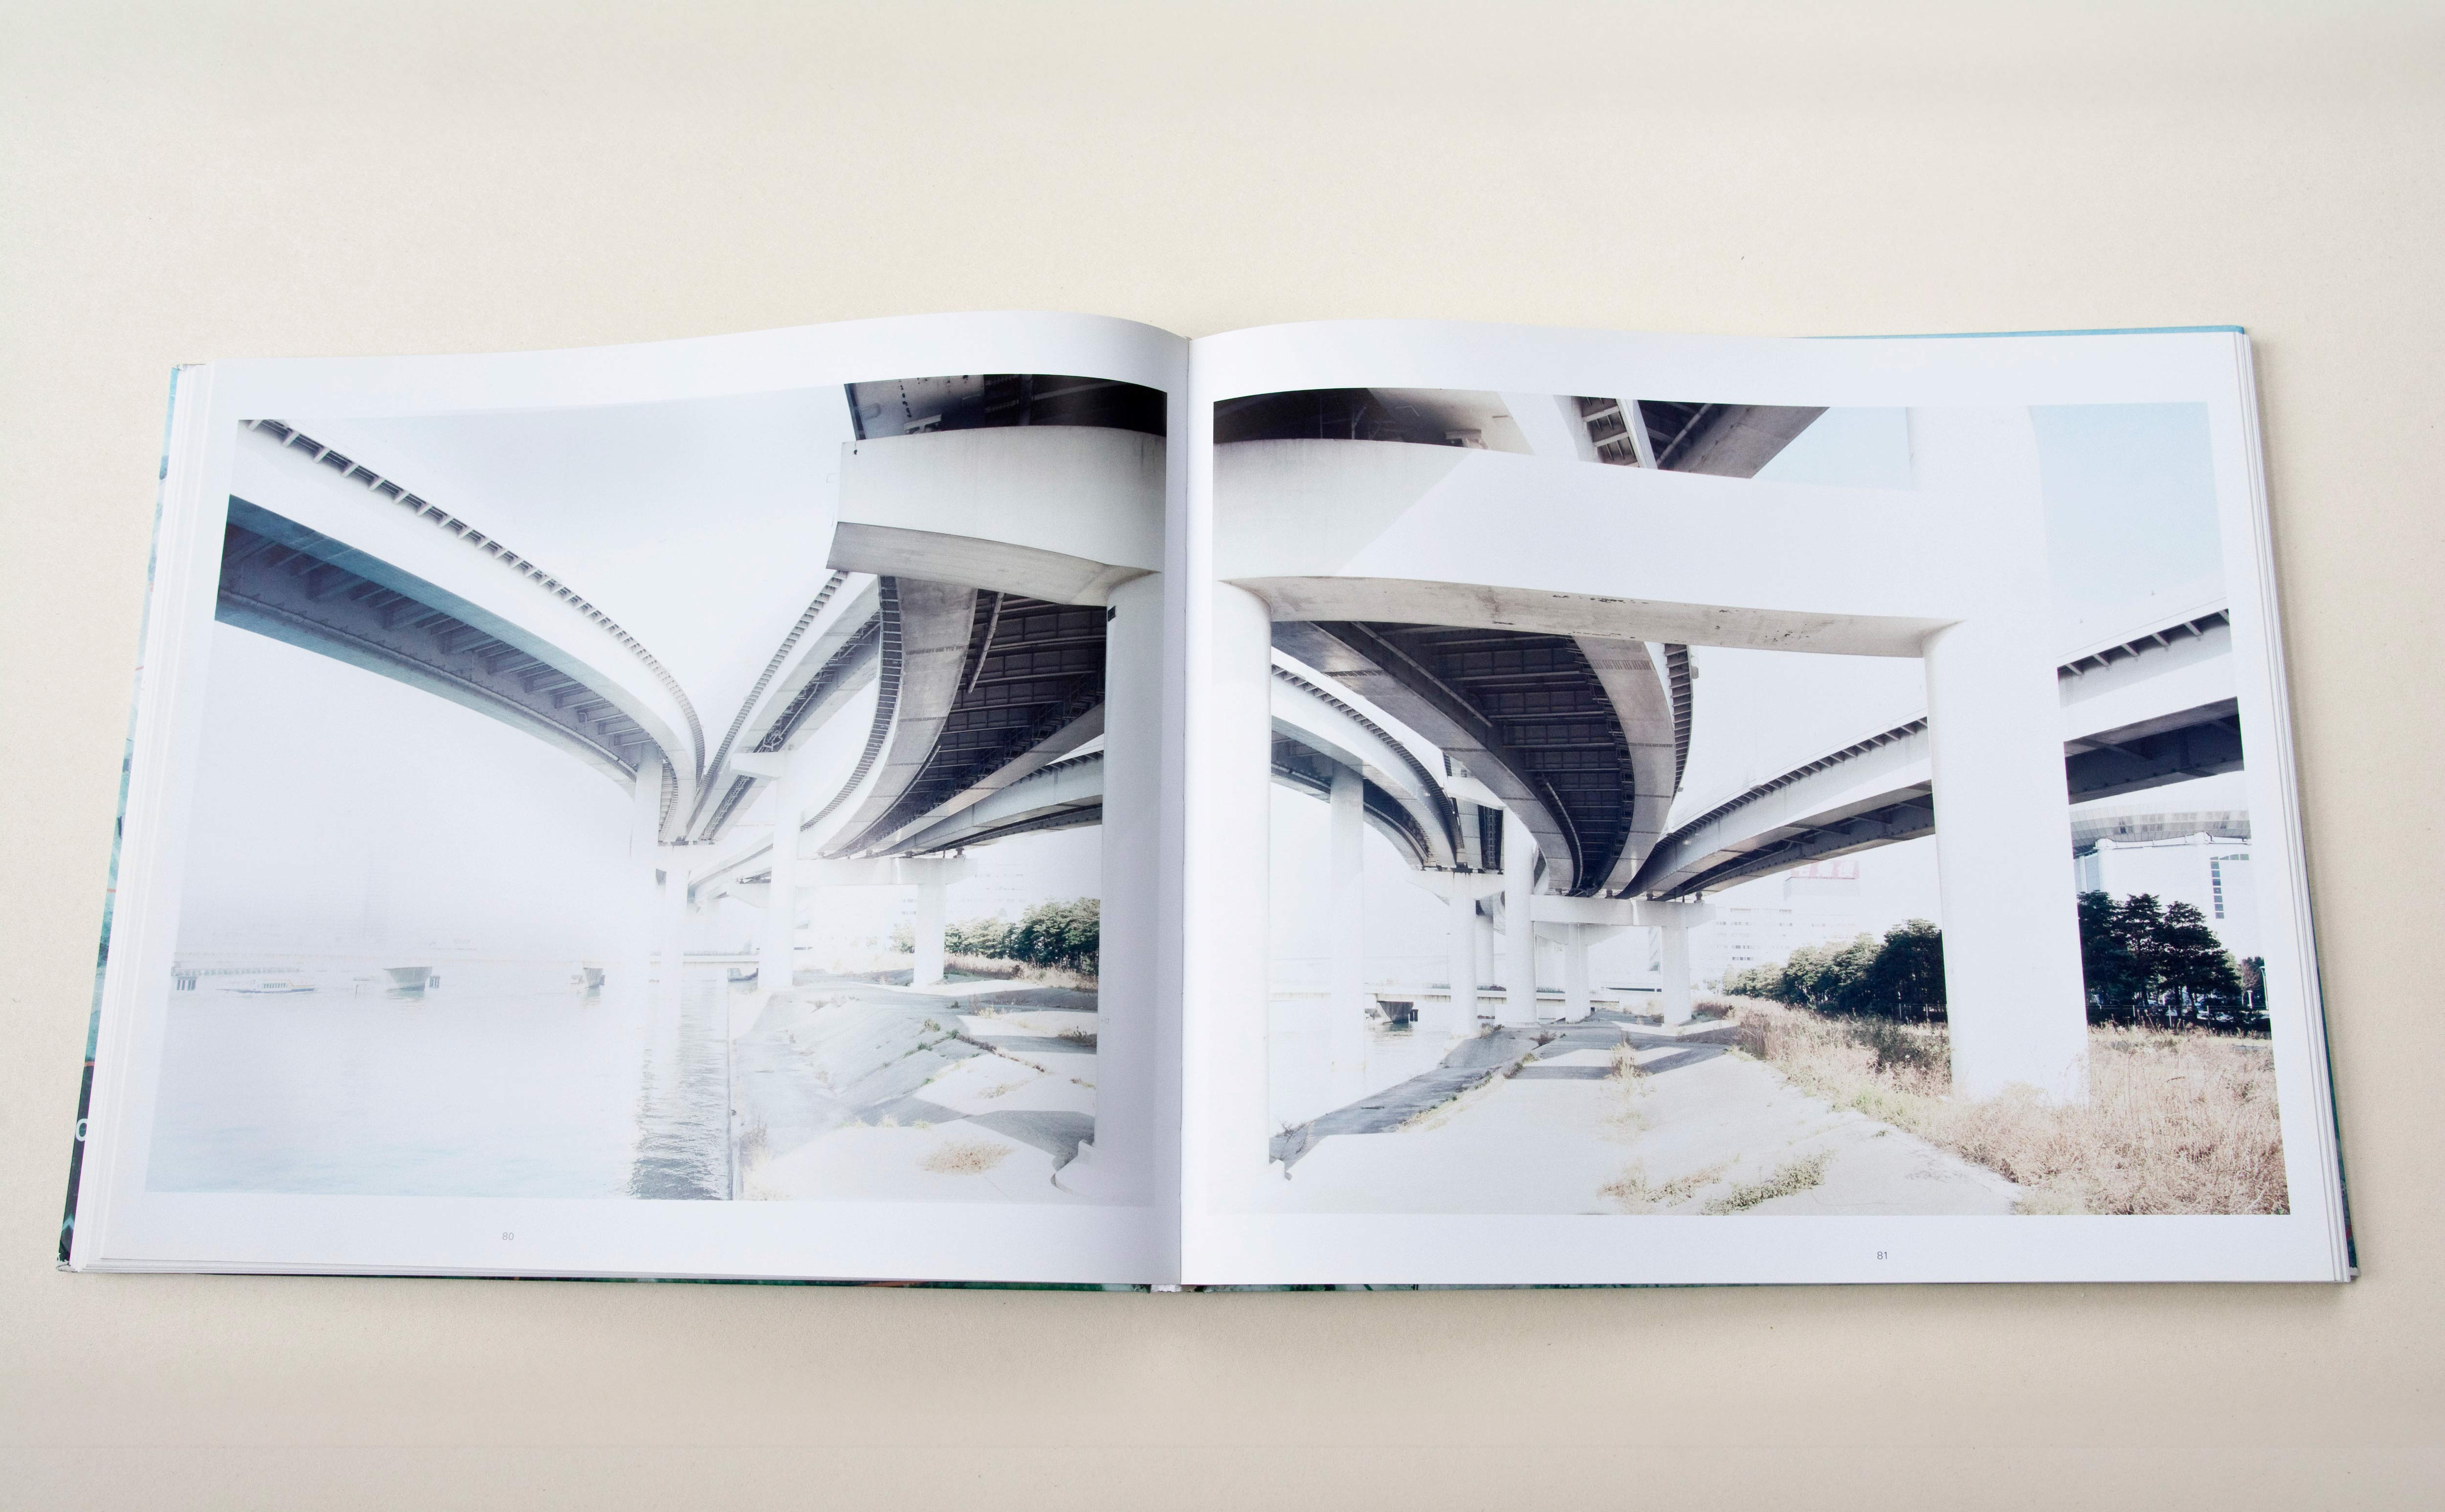 Double page. Large photo with white space around on each page. Left: Under the bridegs of highway junction beside river. Right: Shot from different angle at same location.